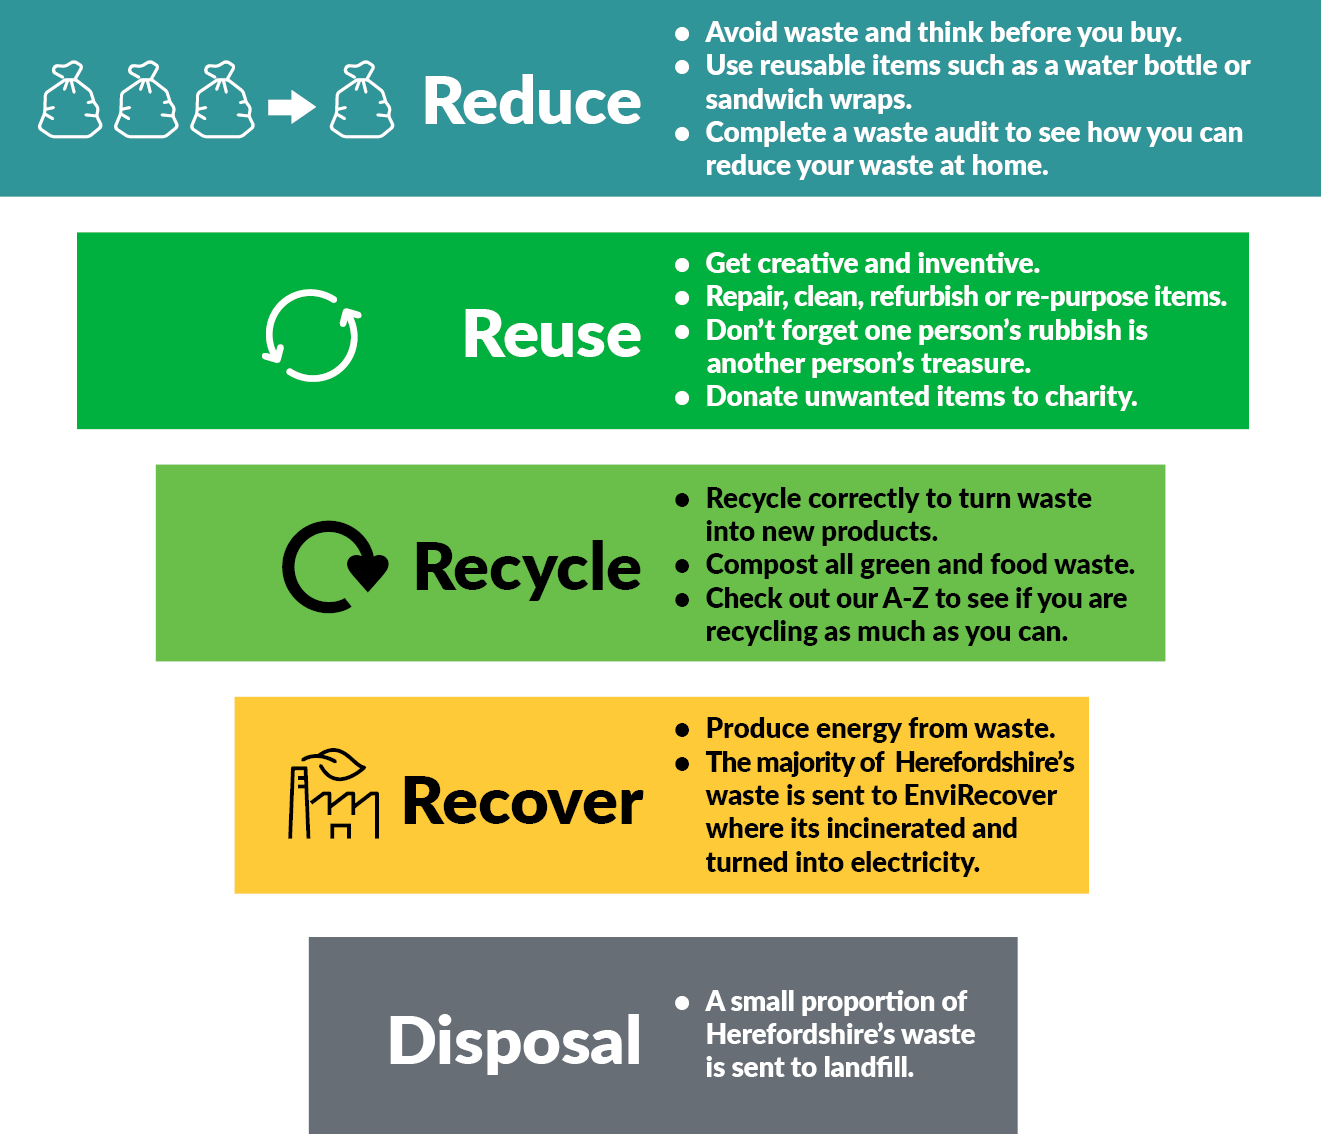 Diagram of waste hierarchy showing reduce, reuse, recycle, recover, disposal options with Reduce as the top priority